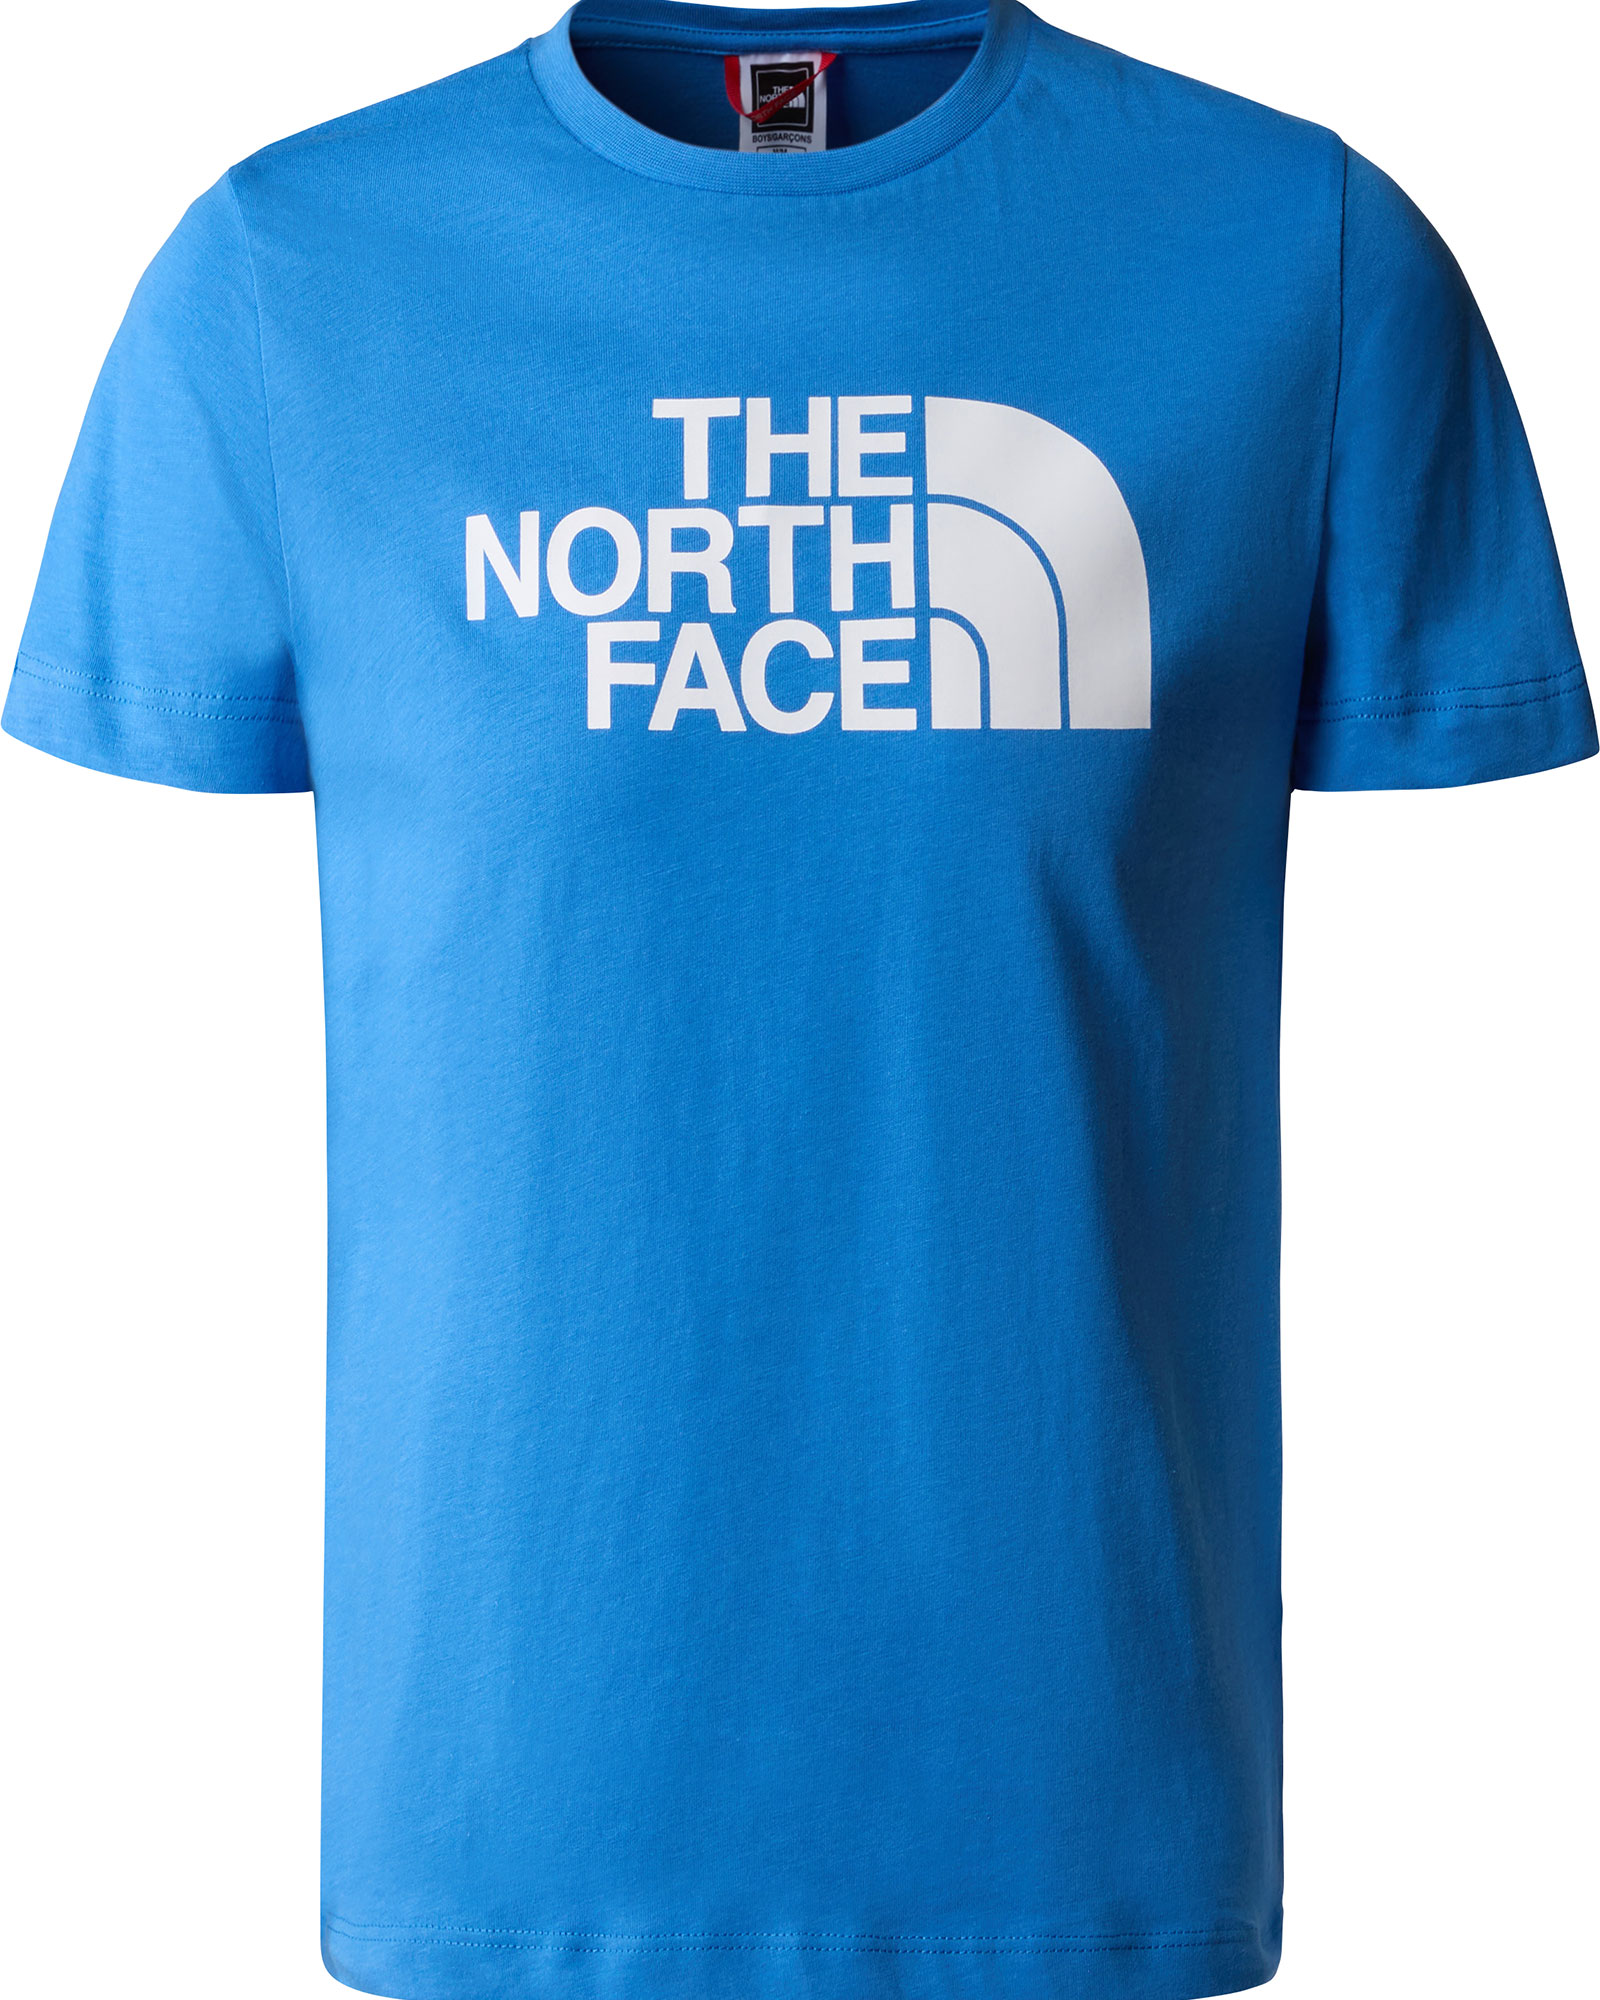 The North Face Boy’s Easy T Shirt - Super Sonic Blue S